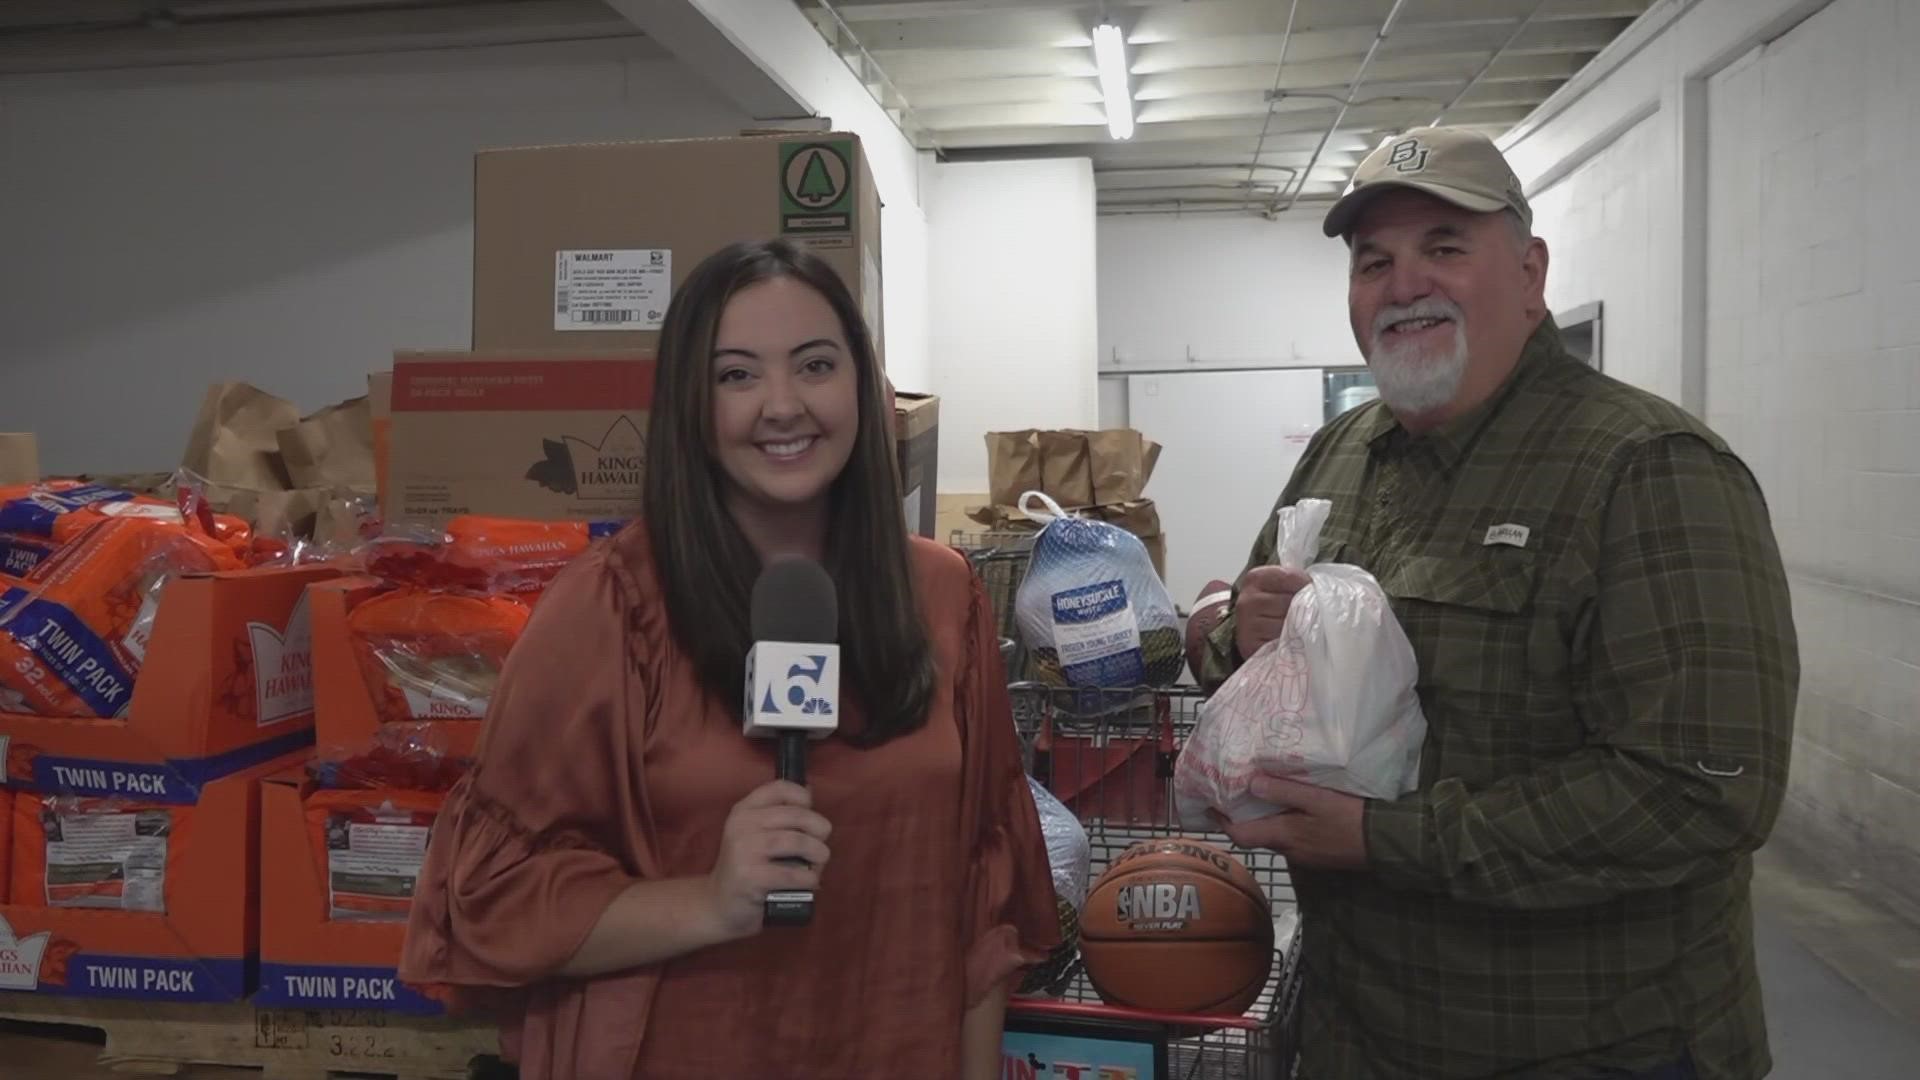 The Food Care Center will hand out thousands of turkeys to families in need at 10 a.m. today.